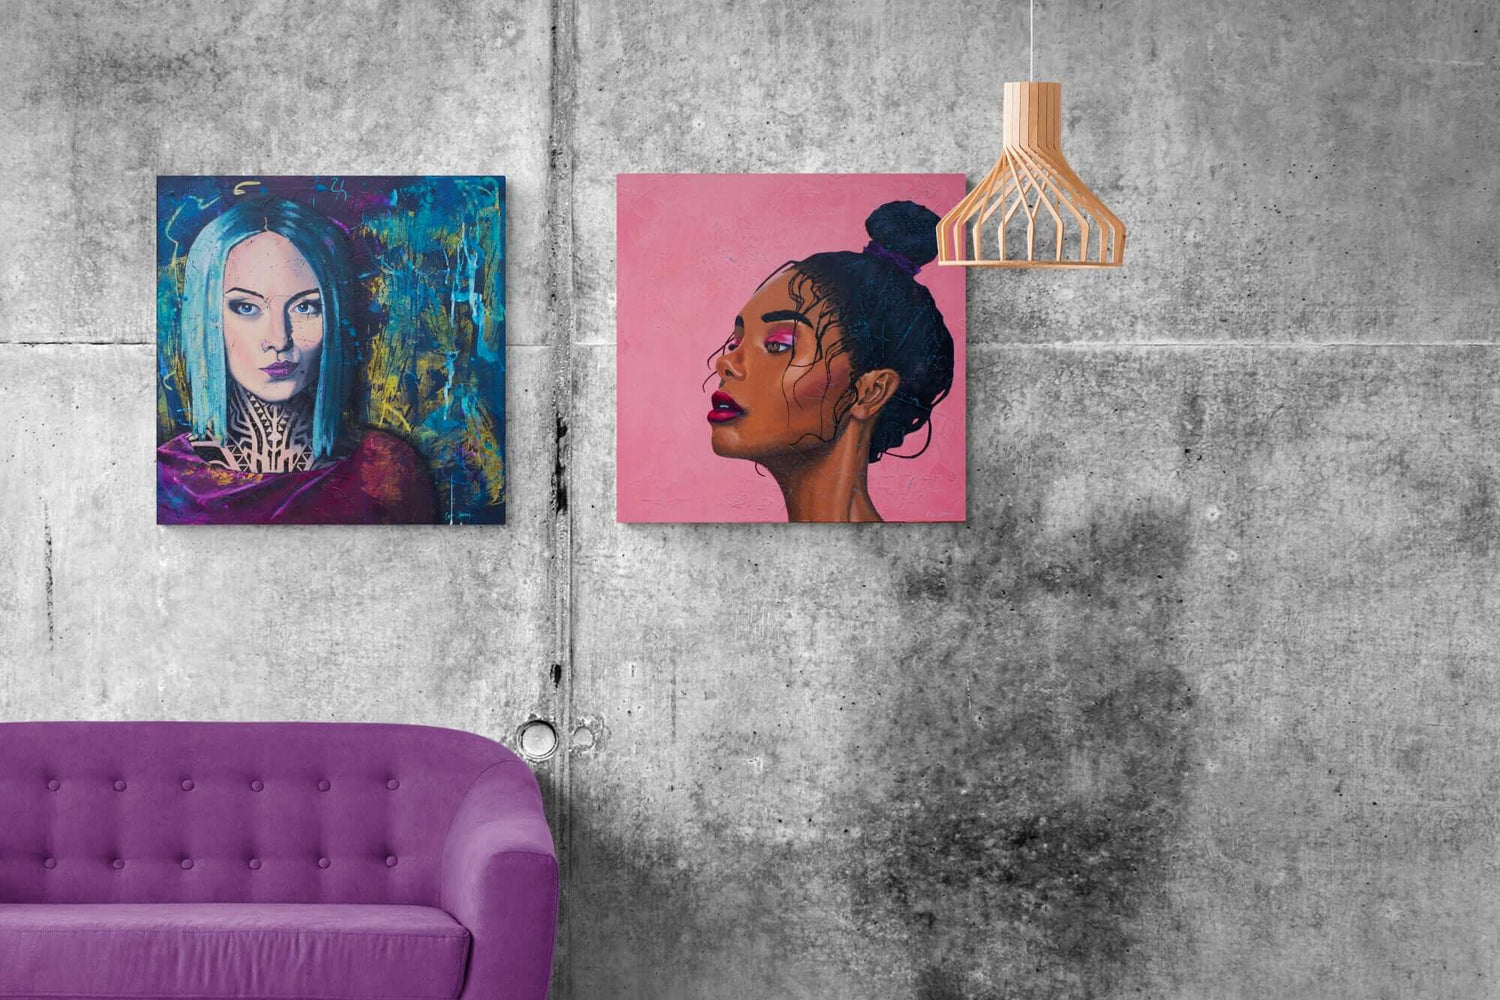 criss chaney artist two colorful portraits of women on a concrete wall grey pink black purple